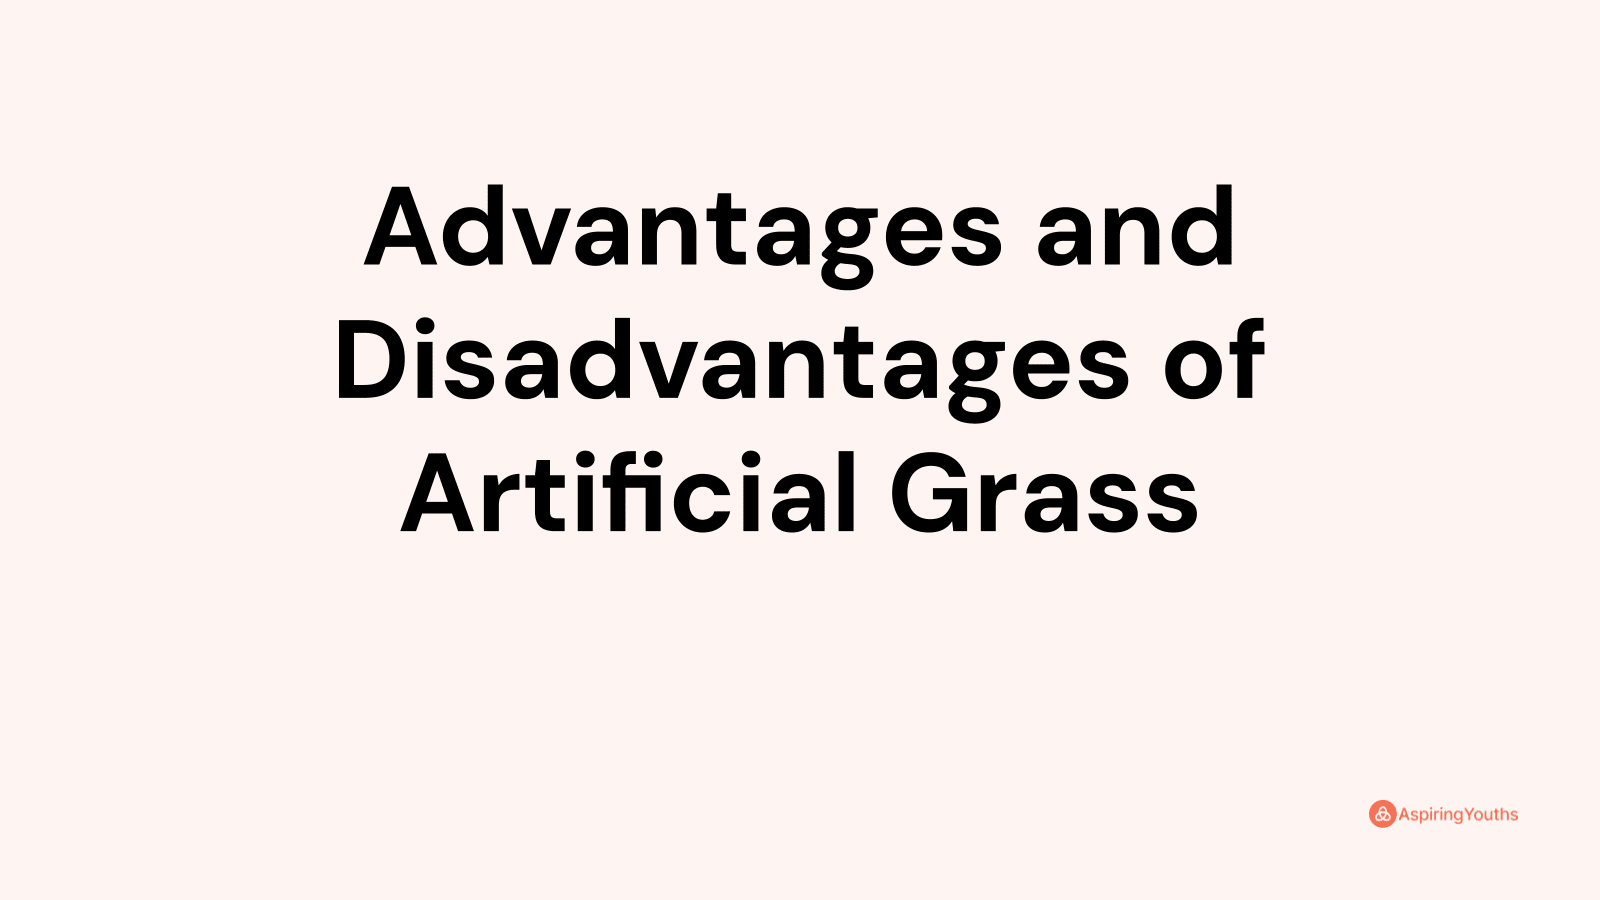 Advantages and disadvantages of Artificial Grass